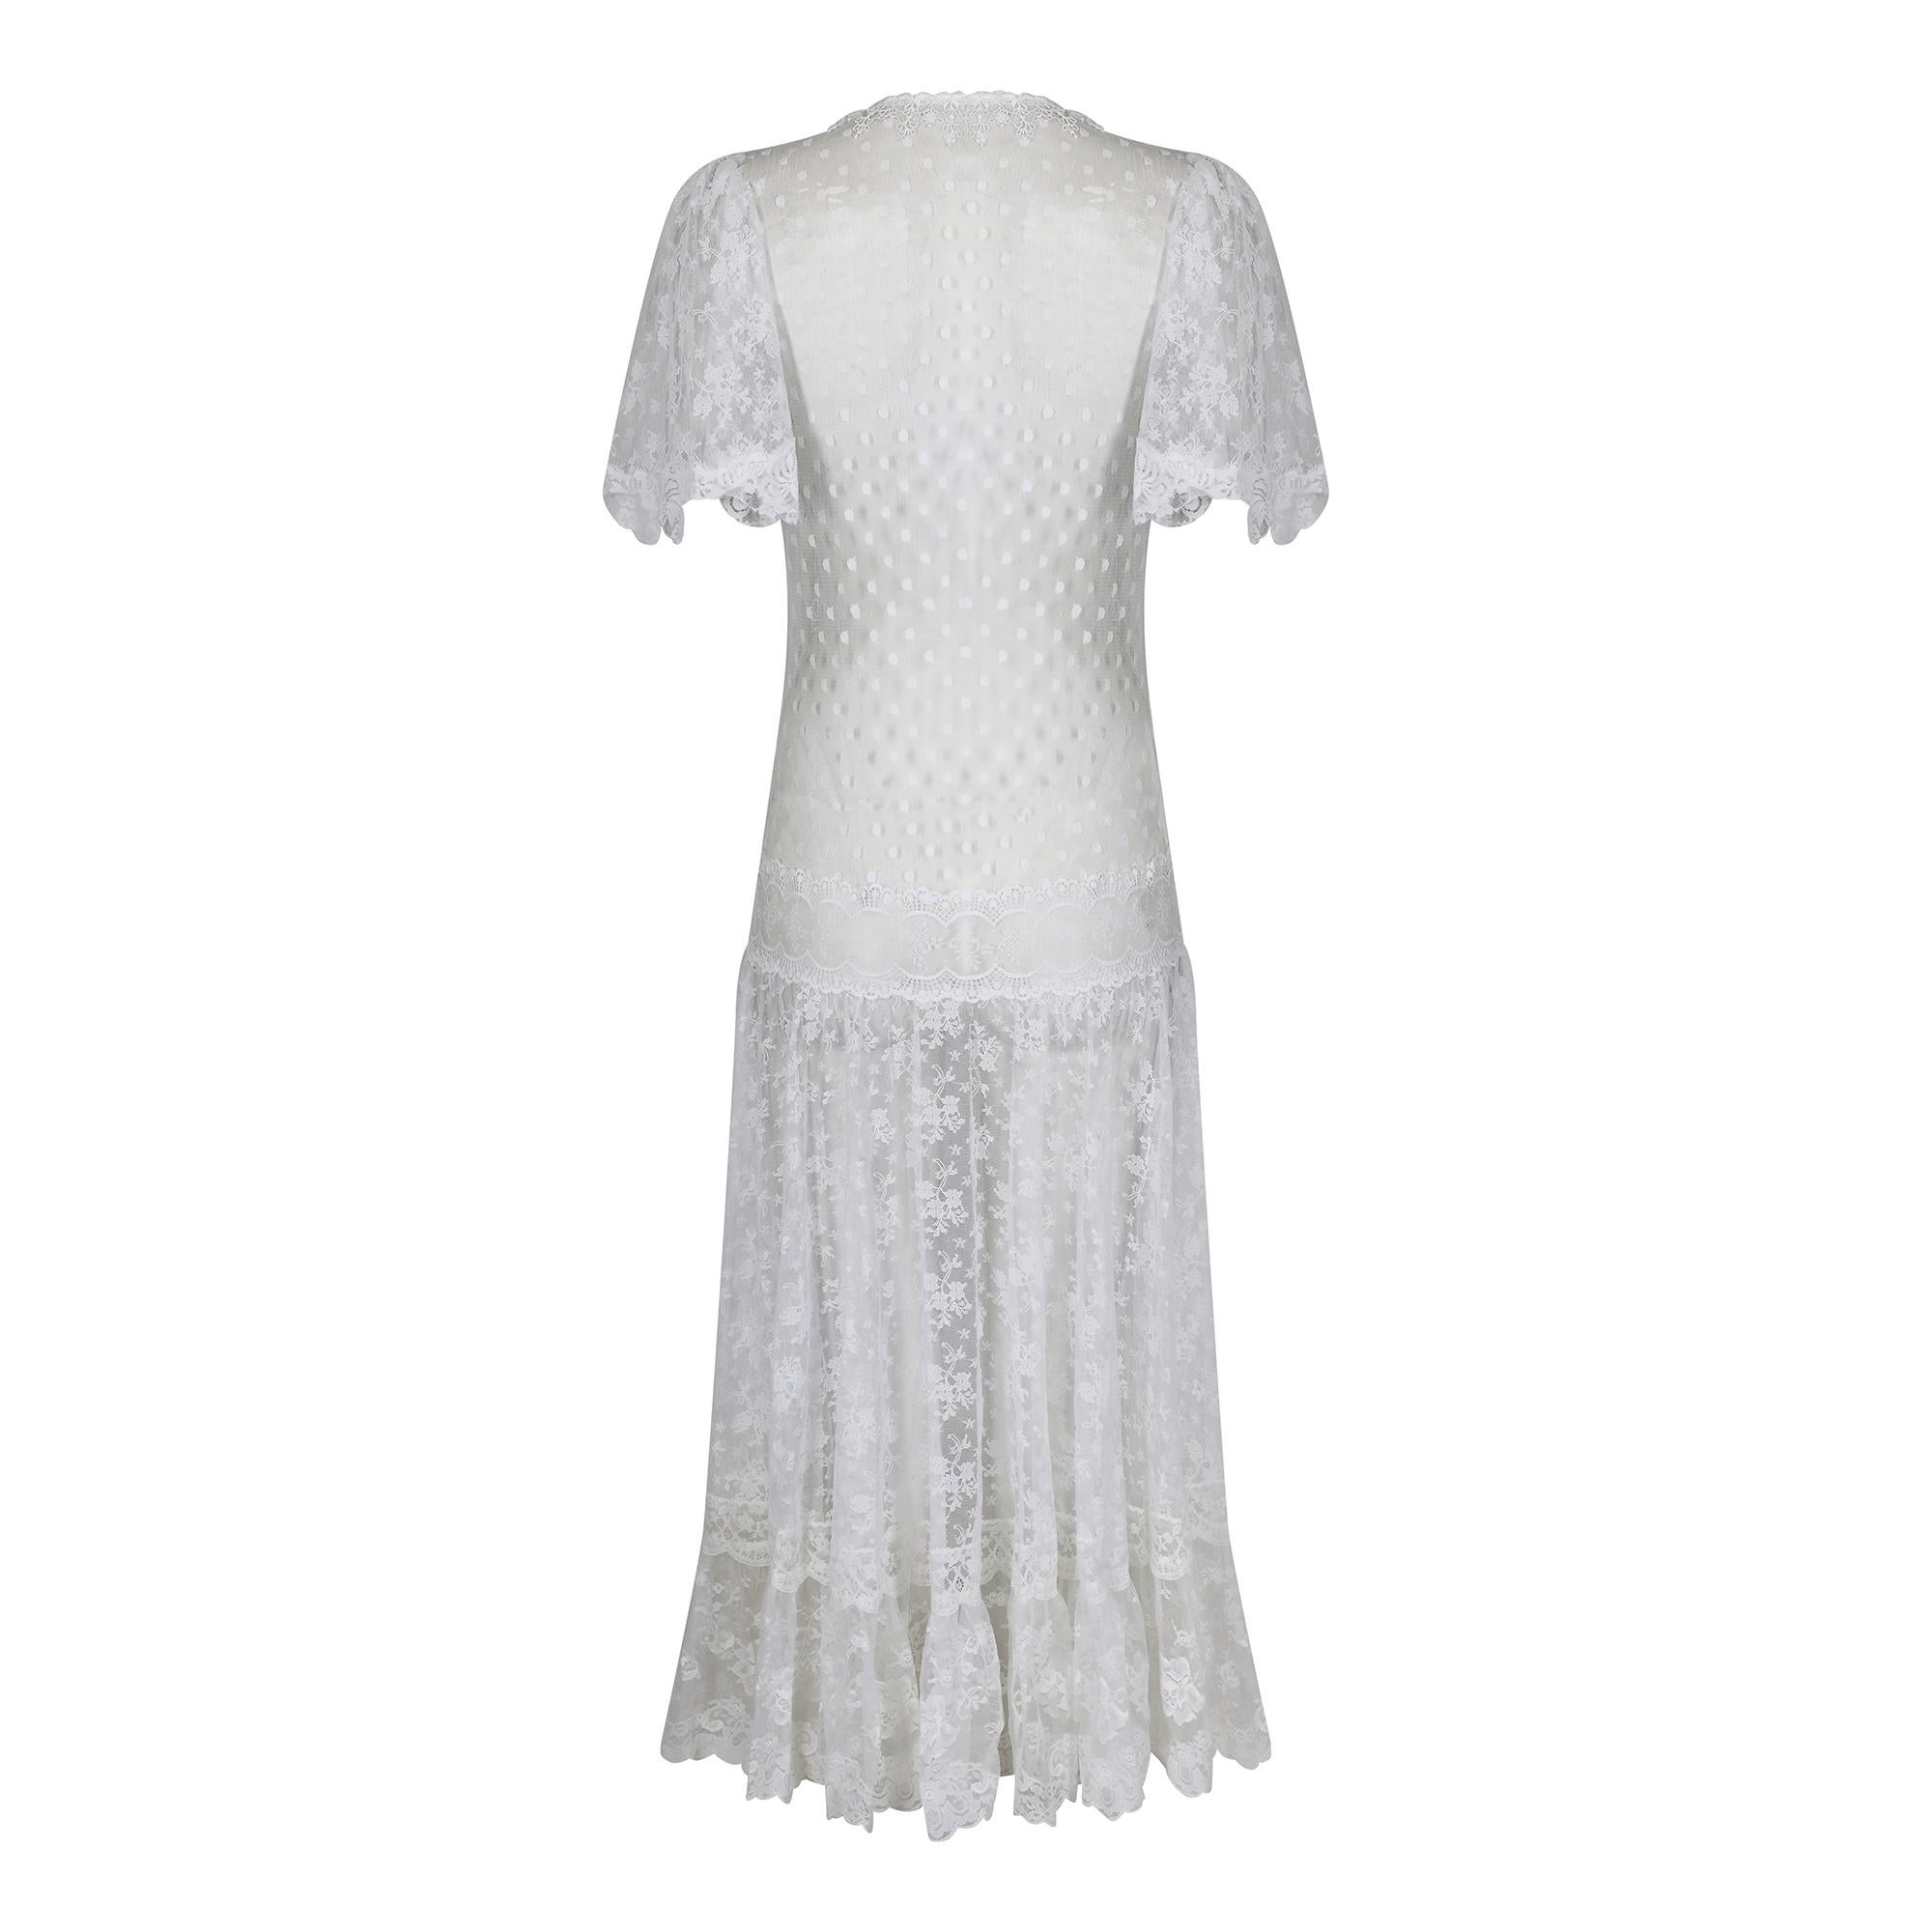 1970s Swiss Dot and Chantilly Lace Dropped Waist Dress In Excellent Condition For Sale In London, GB